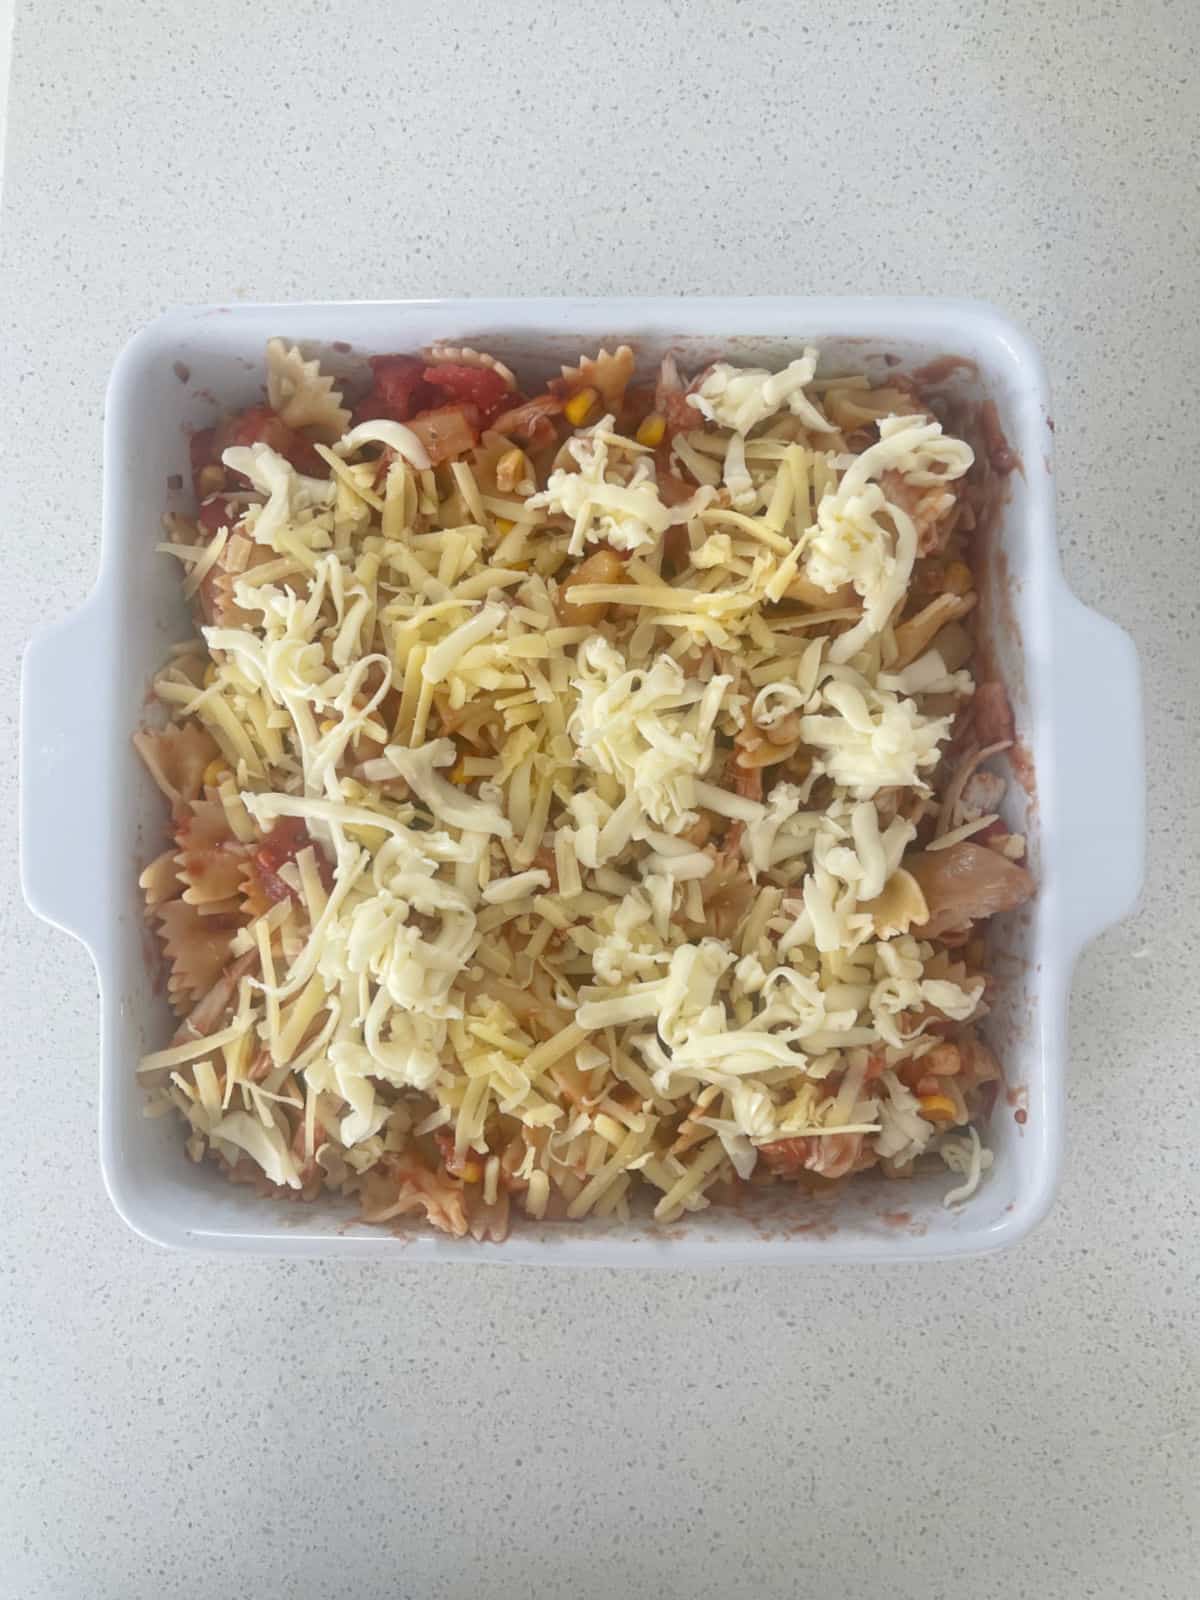 BBQ Chicken Pasta Bake topped with cheese ready to go into the oven.